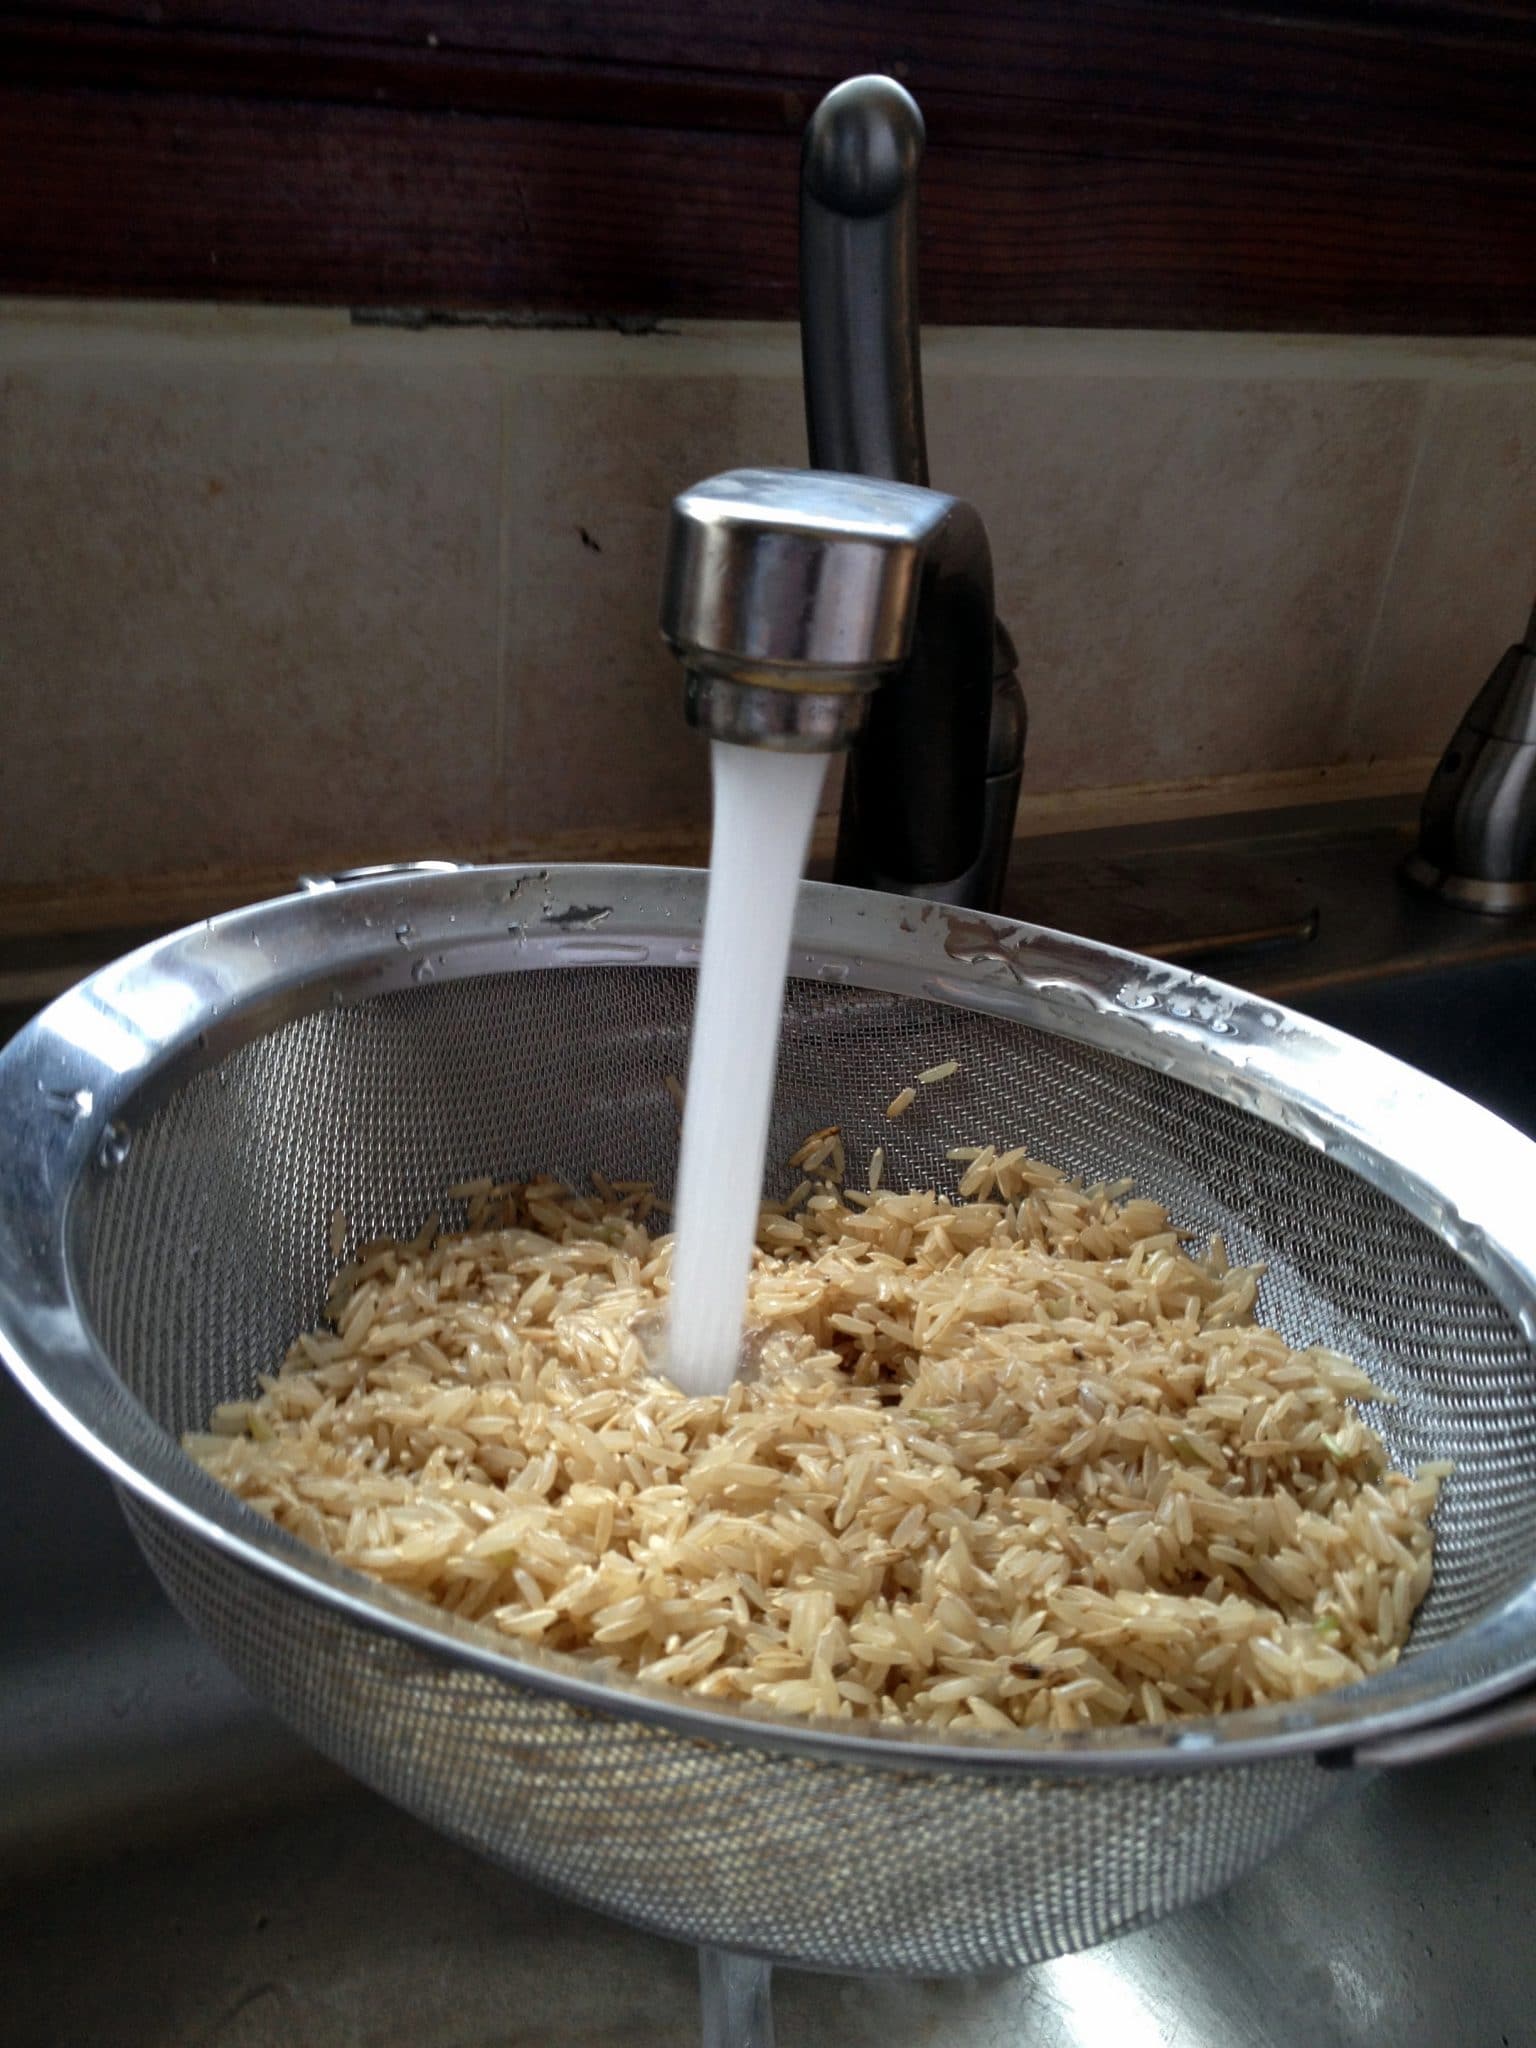 Rice in mesh strainer being rinsed by water streaming from faucet